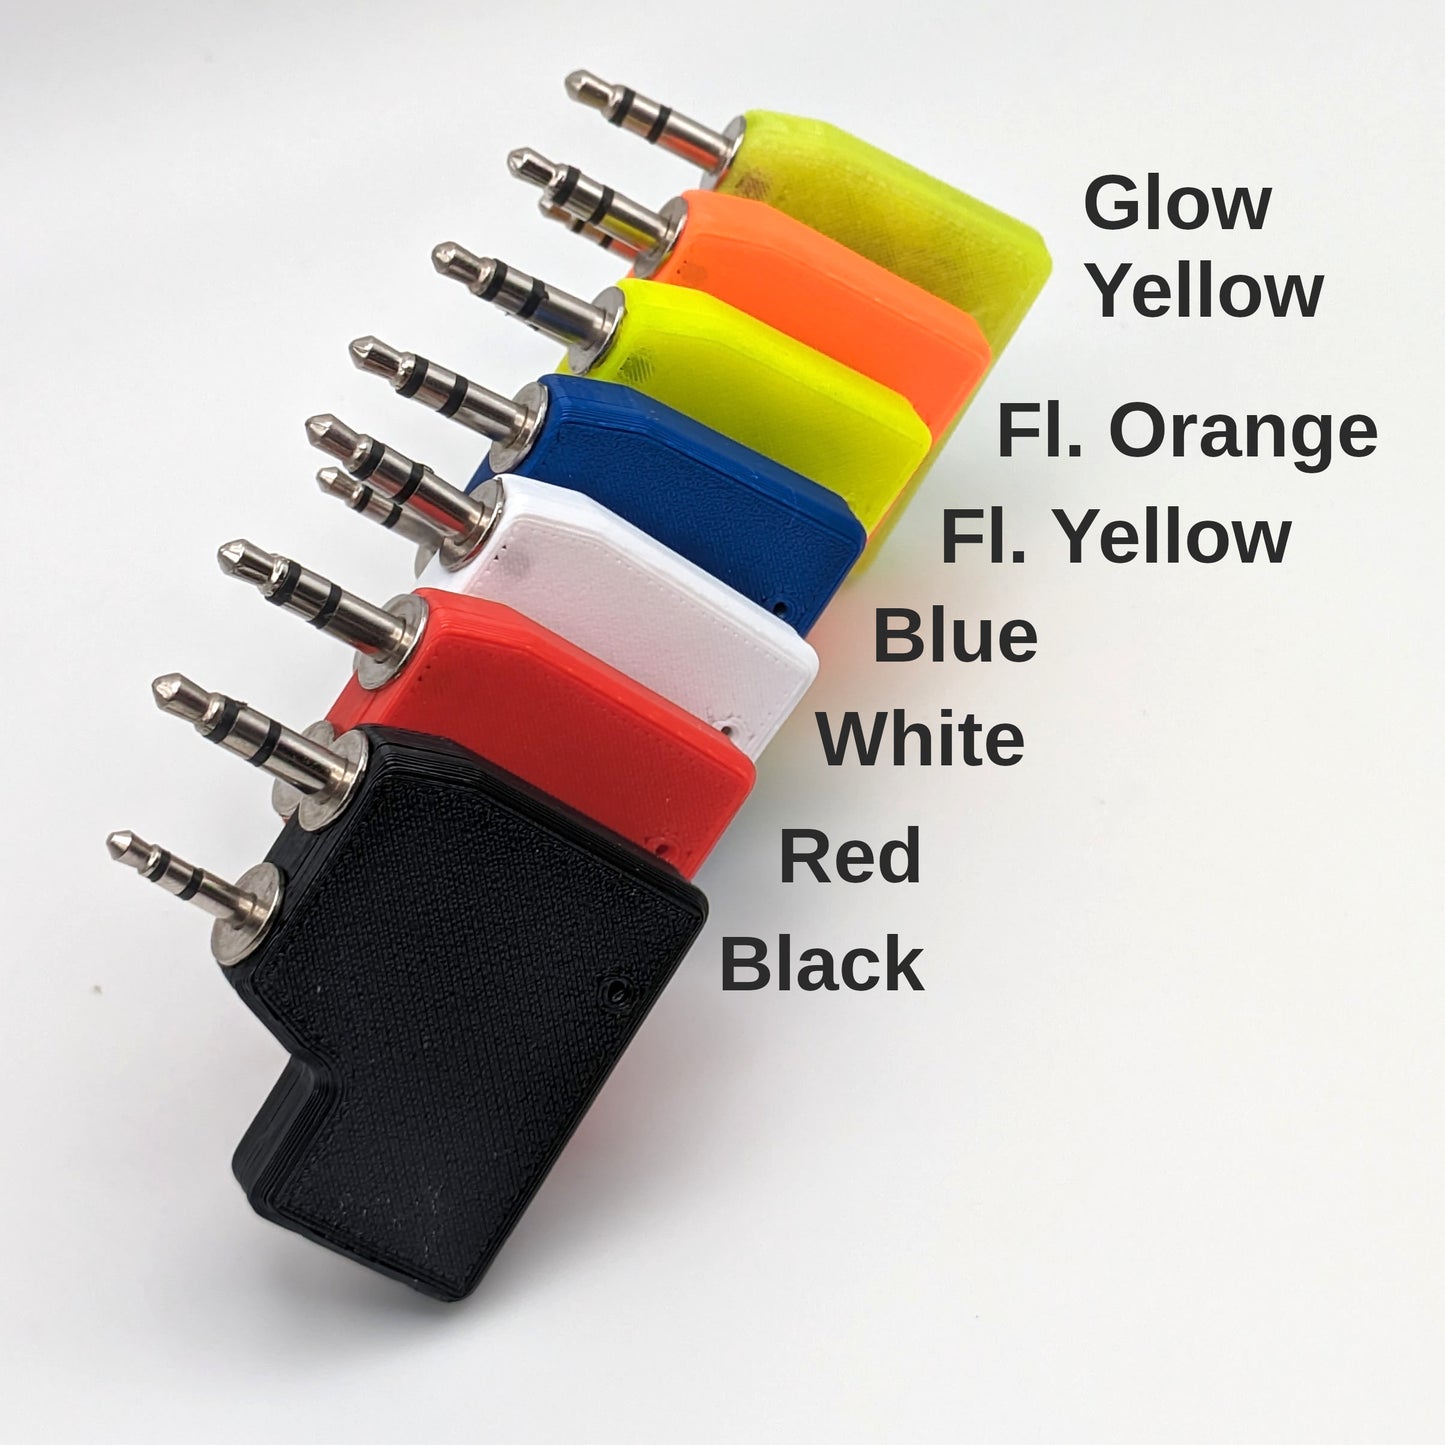 Collection of all AIOC case colors with text of each color (Black, Red, White, Blue, Fluorescent Yellow, Fluorescent Orange, and Glow Yellow)